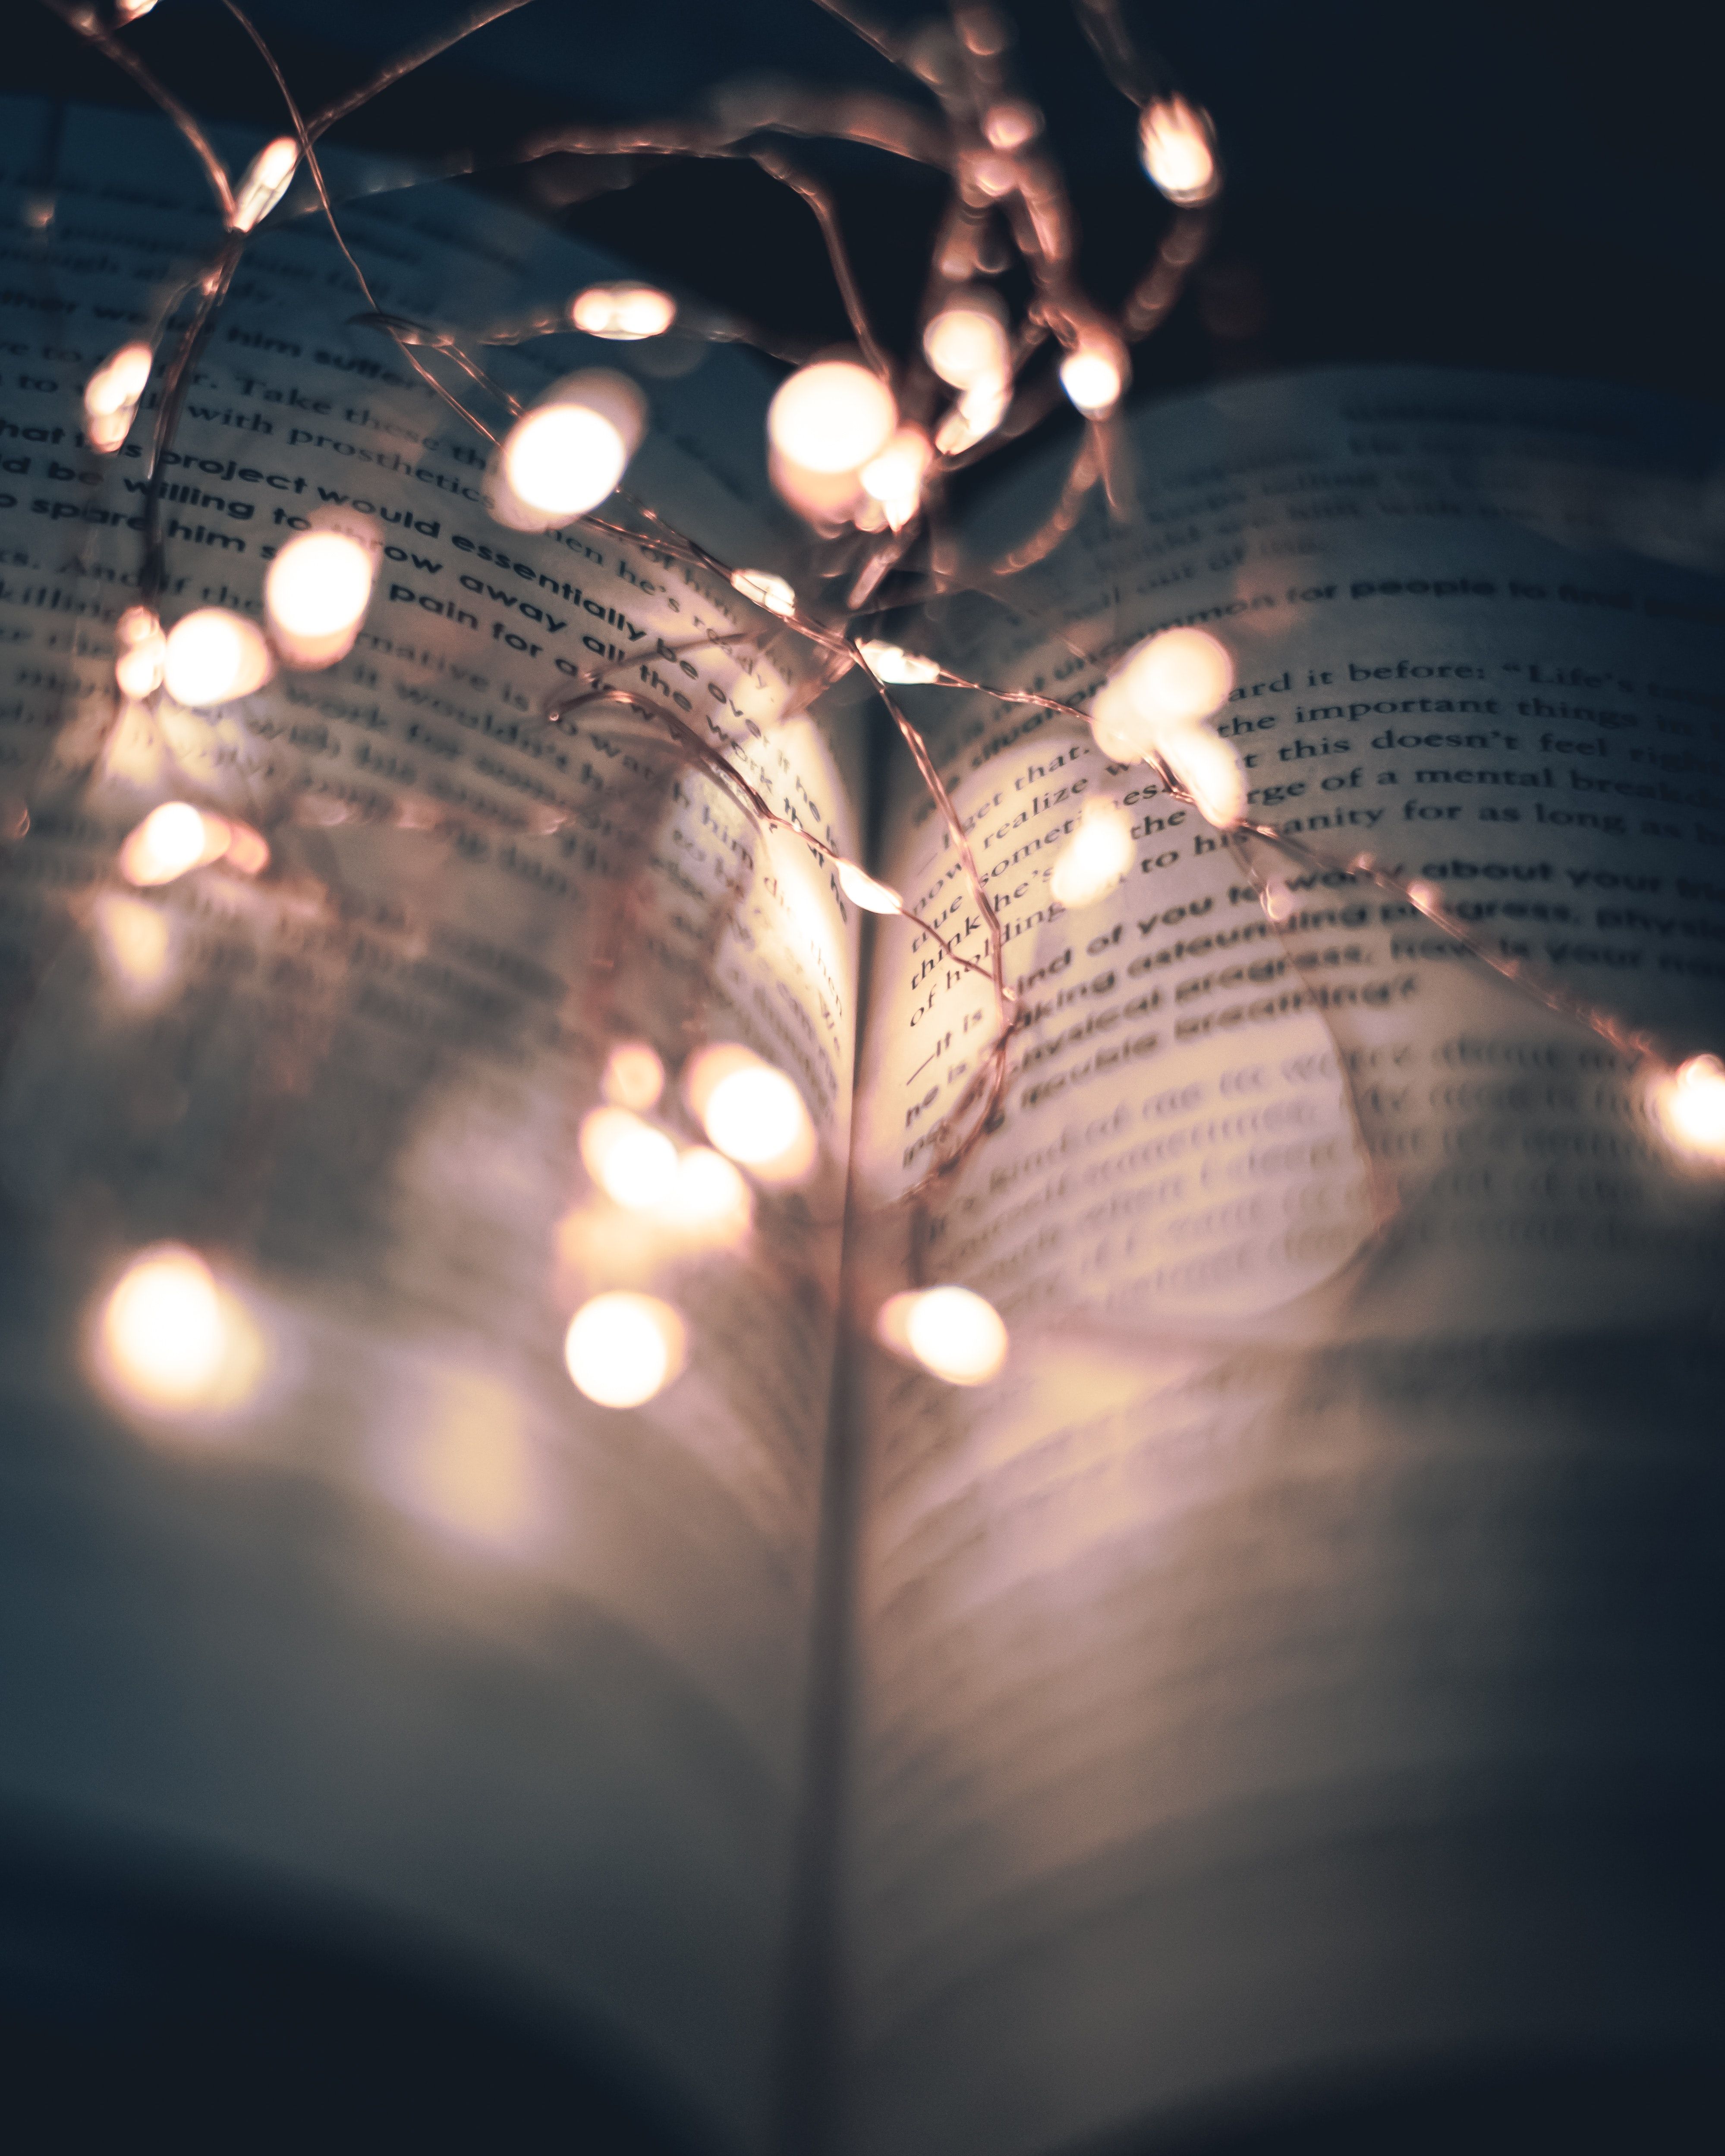 A book with fairy lights in the background - Fairy lights